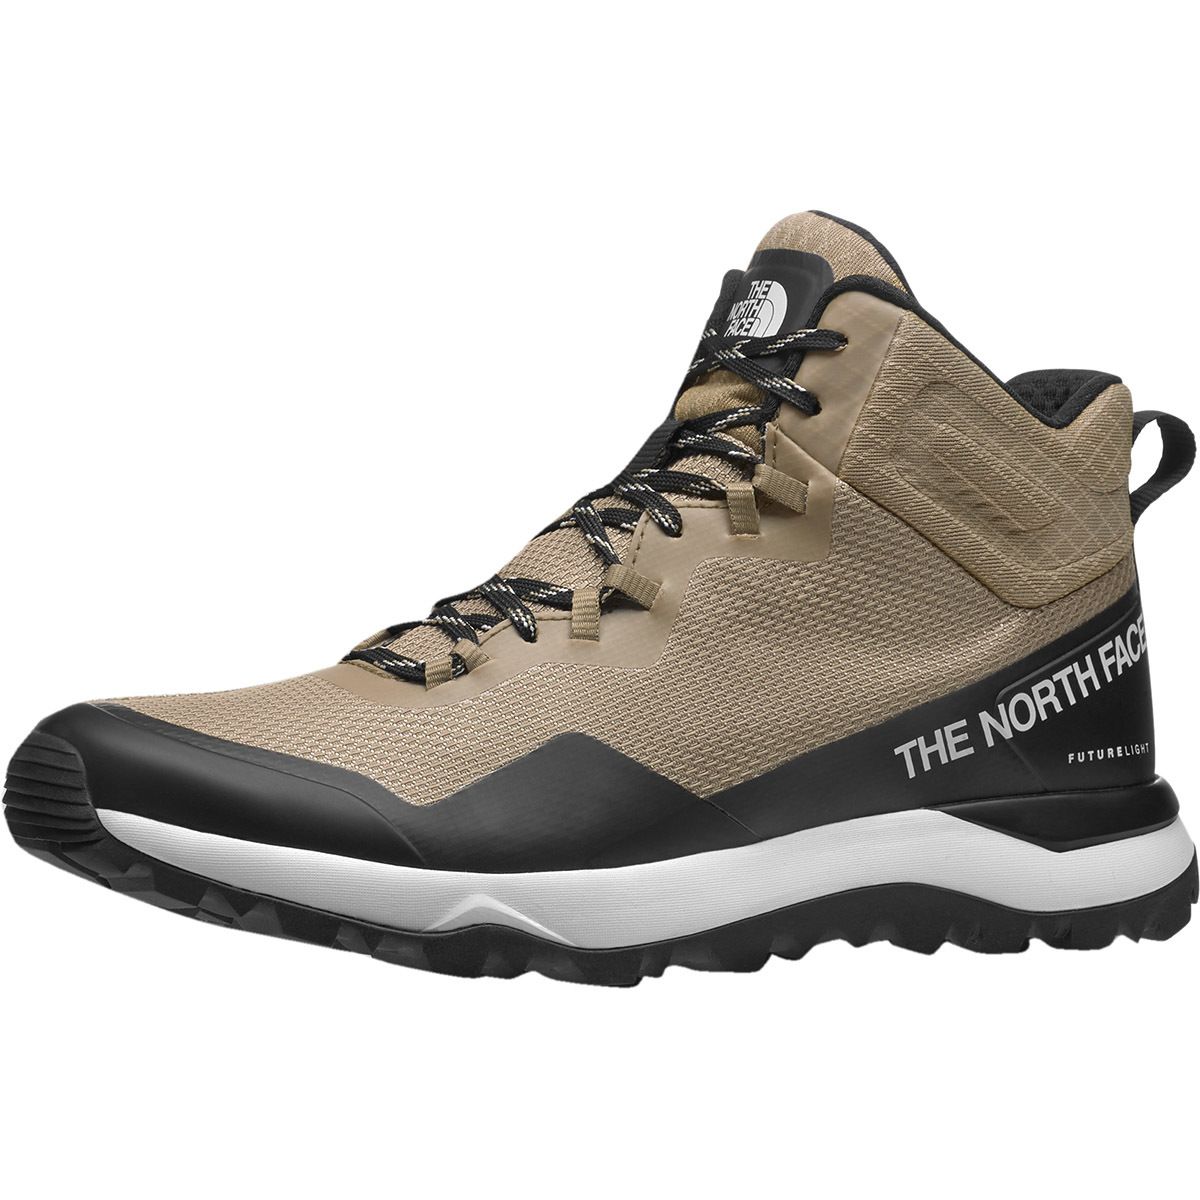 The North Face - Men's Casual Fashion Shoes and Sneakers